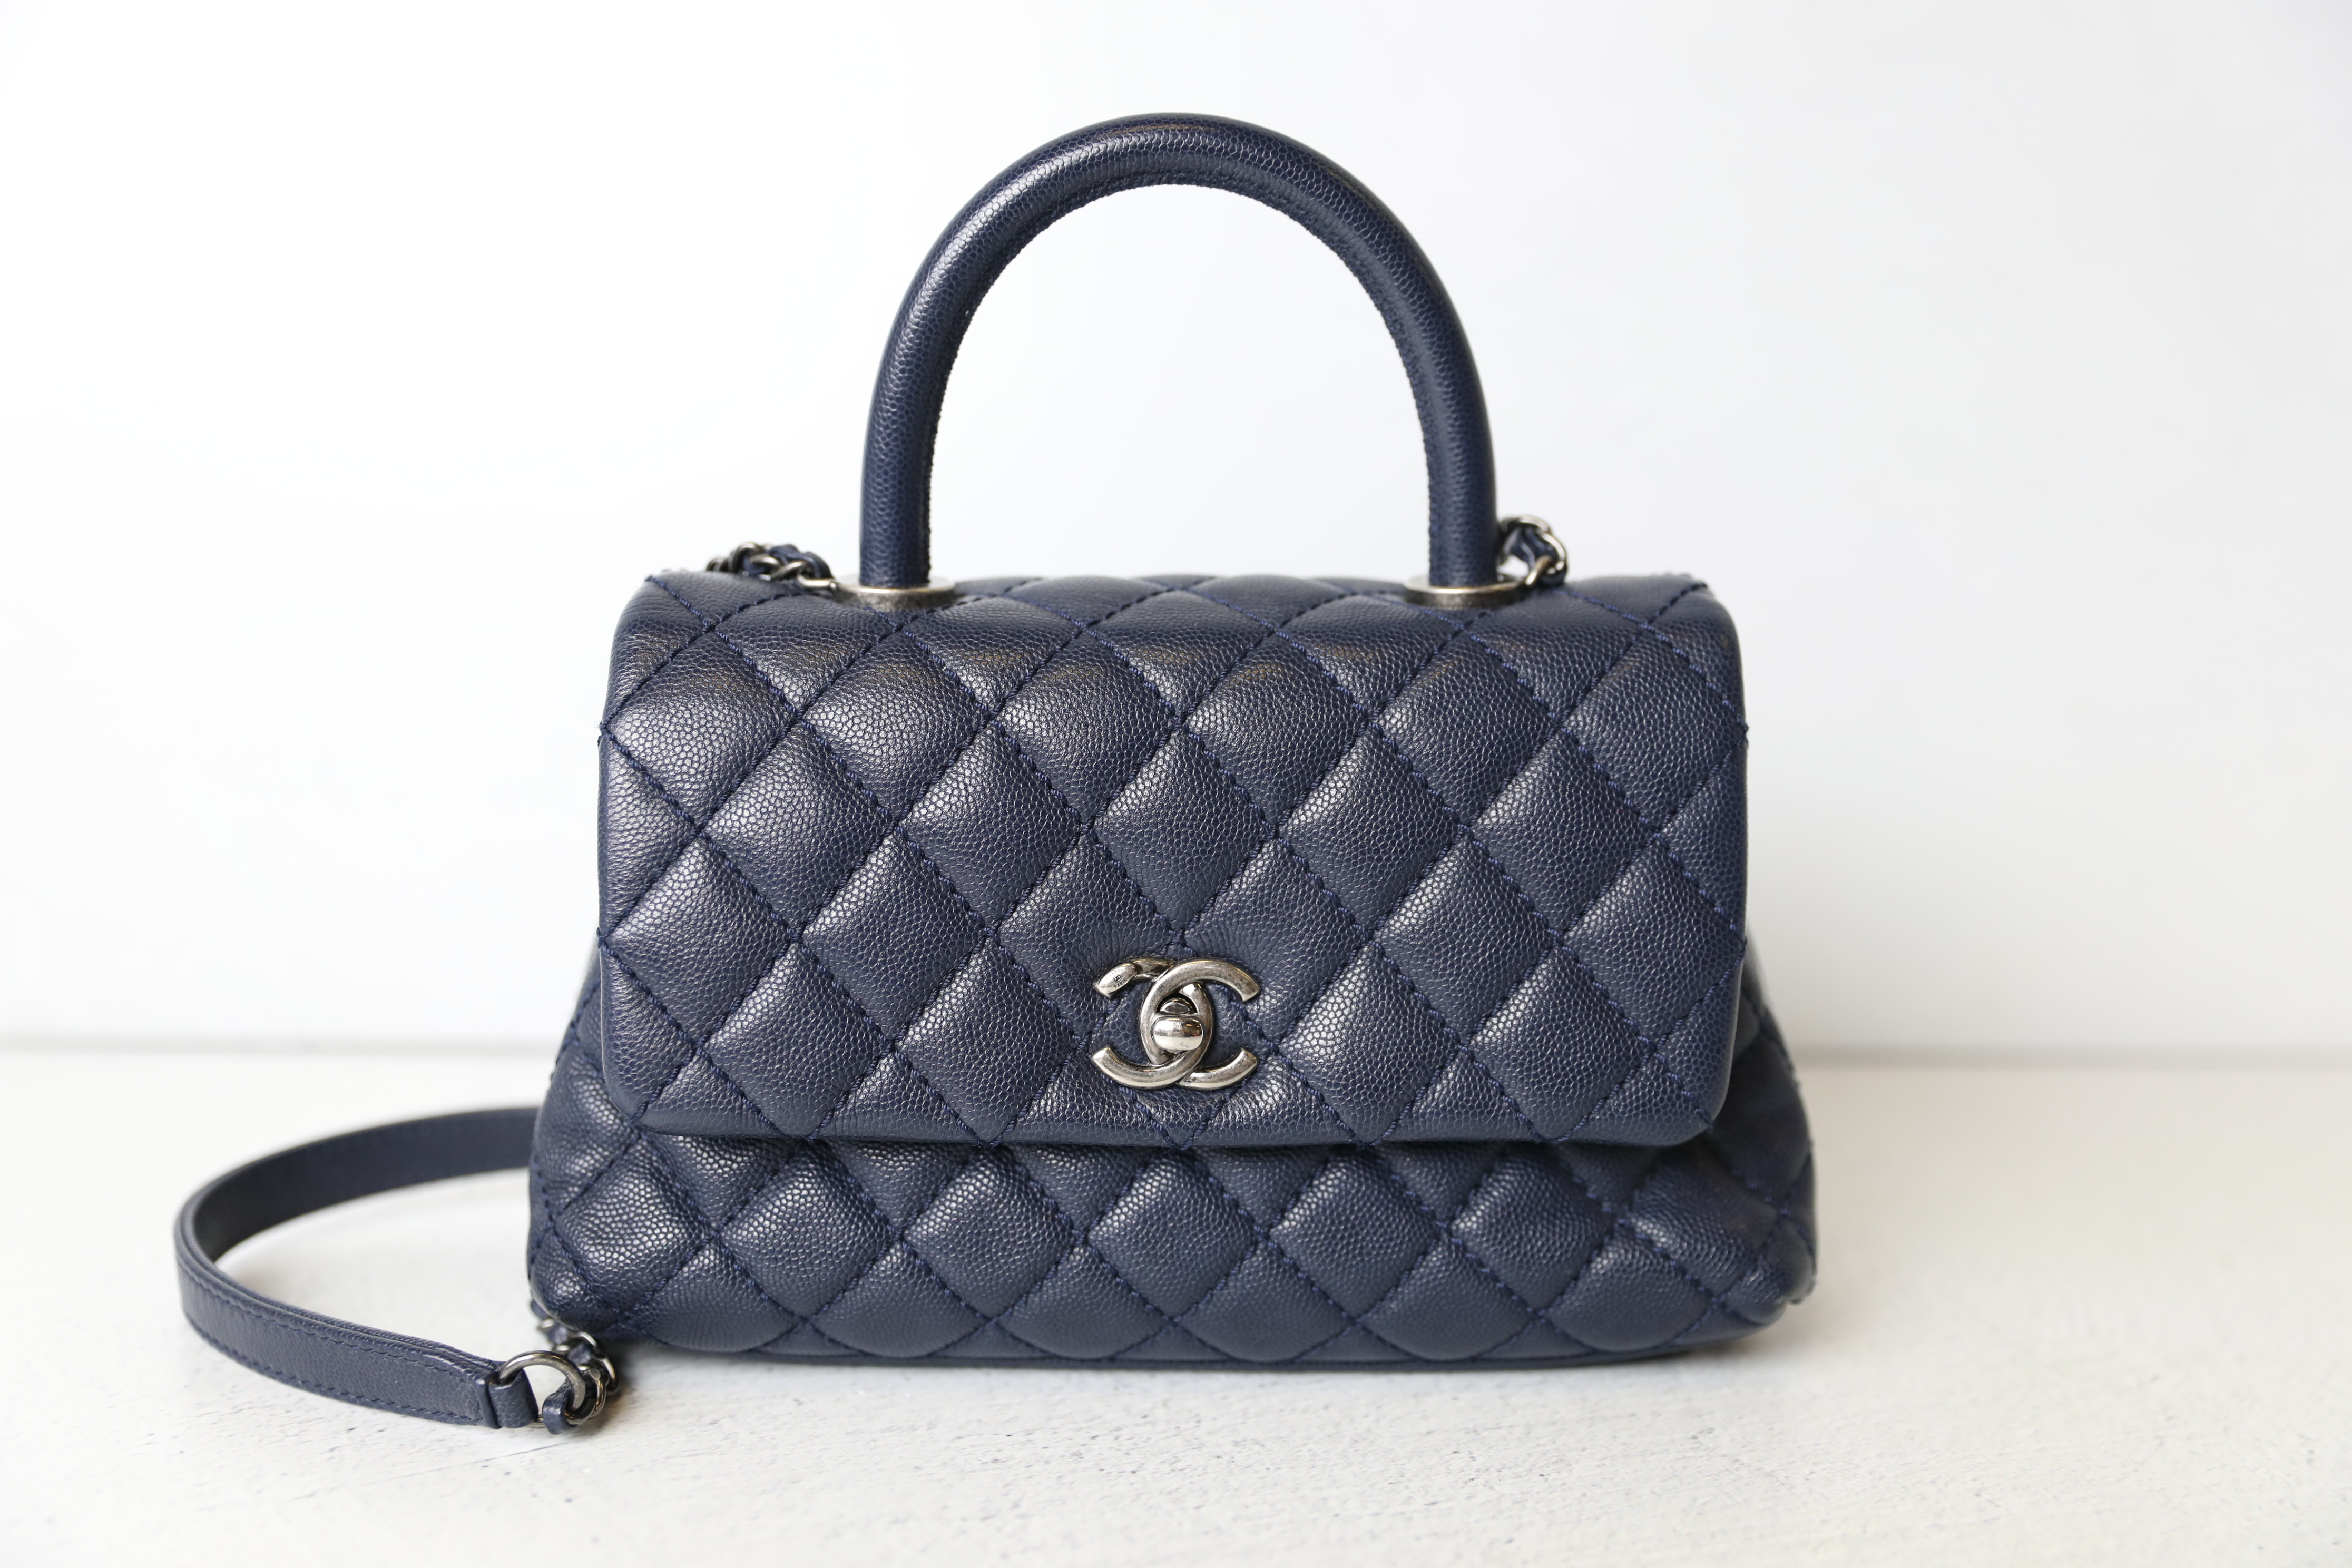 Coco handle leather handbag Chanel Blue in Leather - 30943451